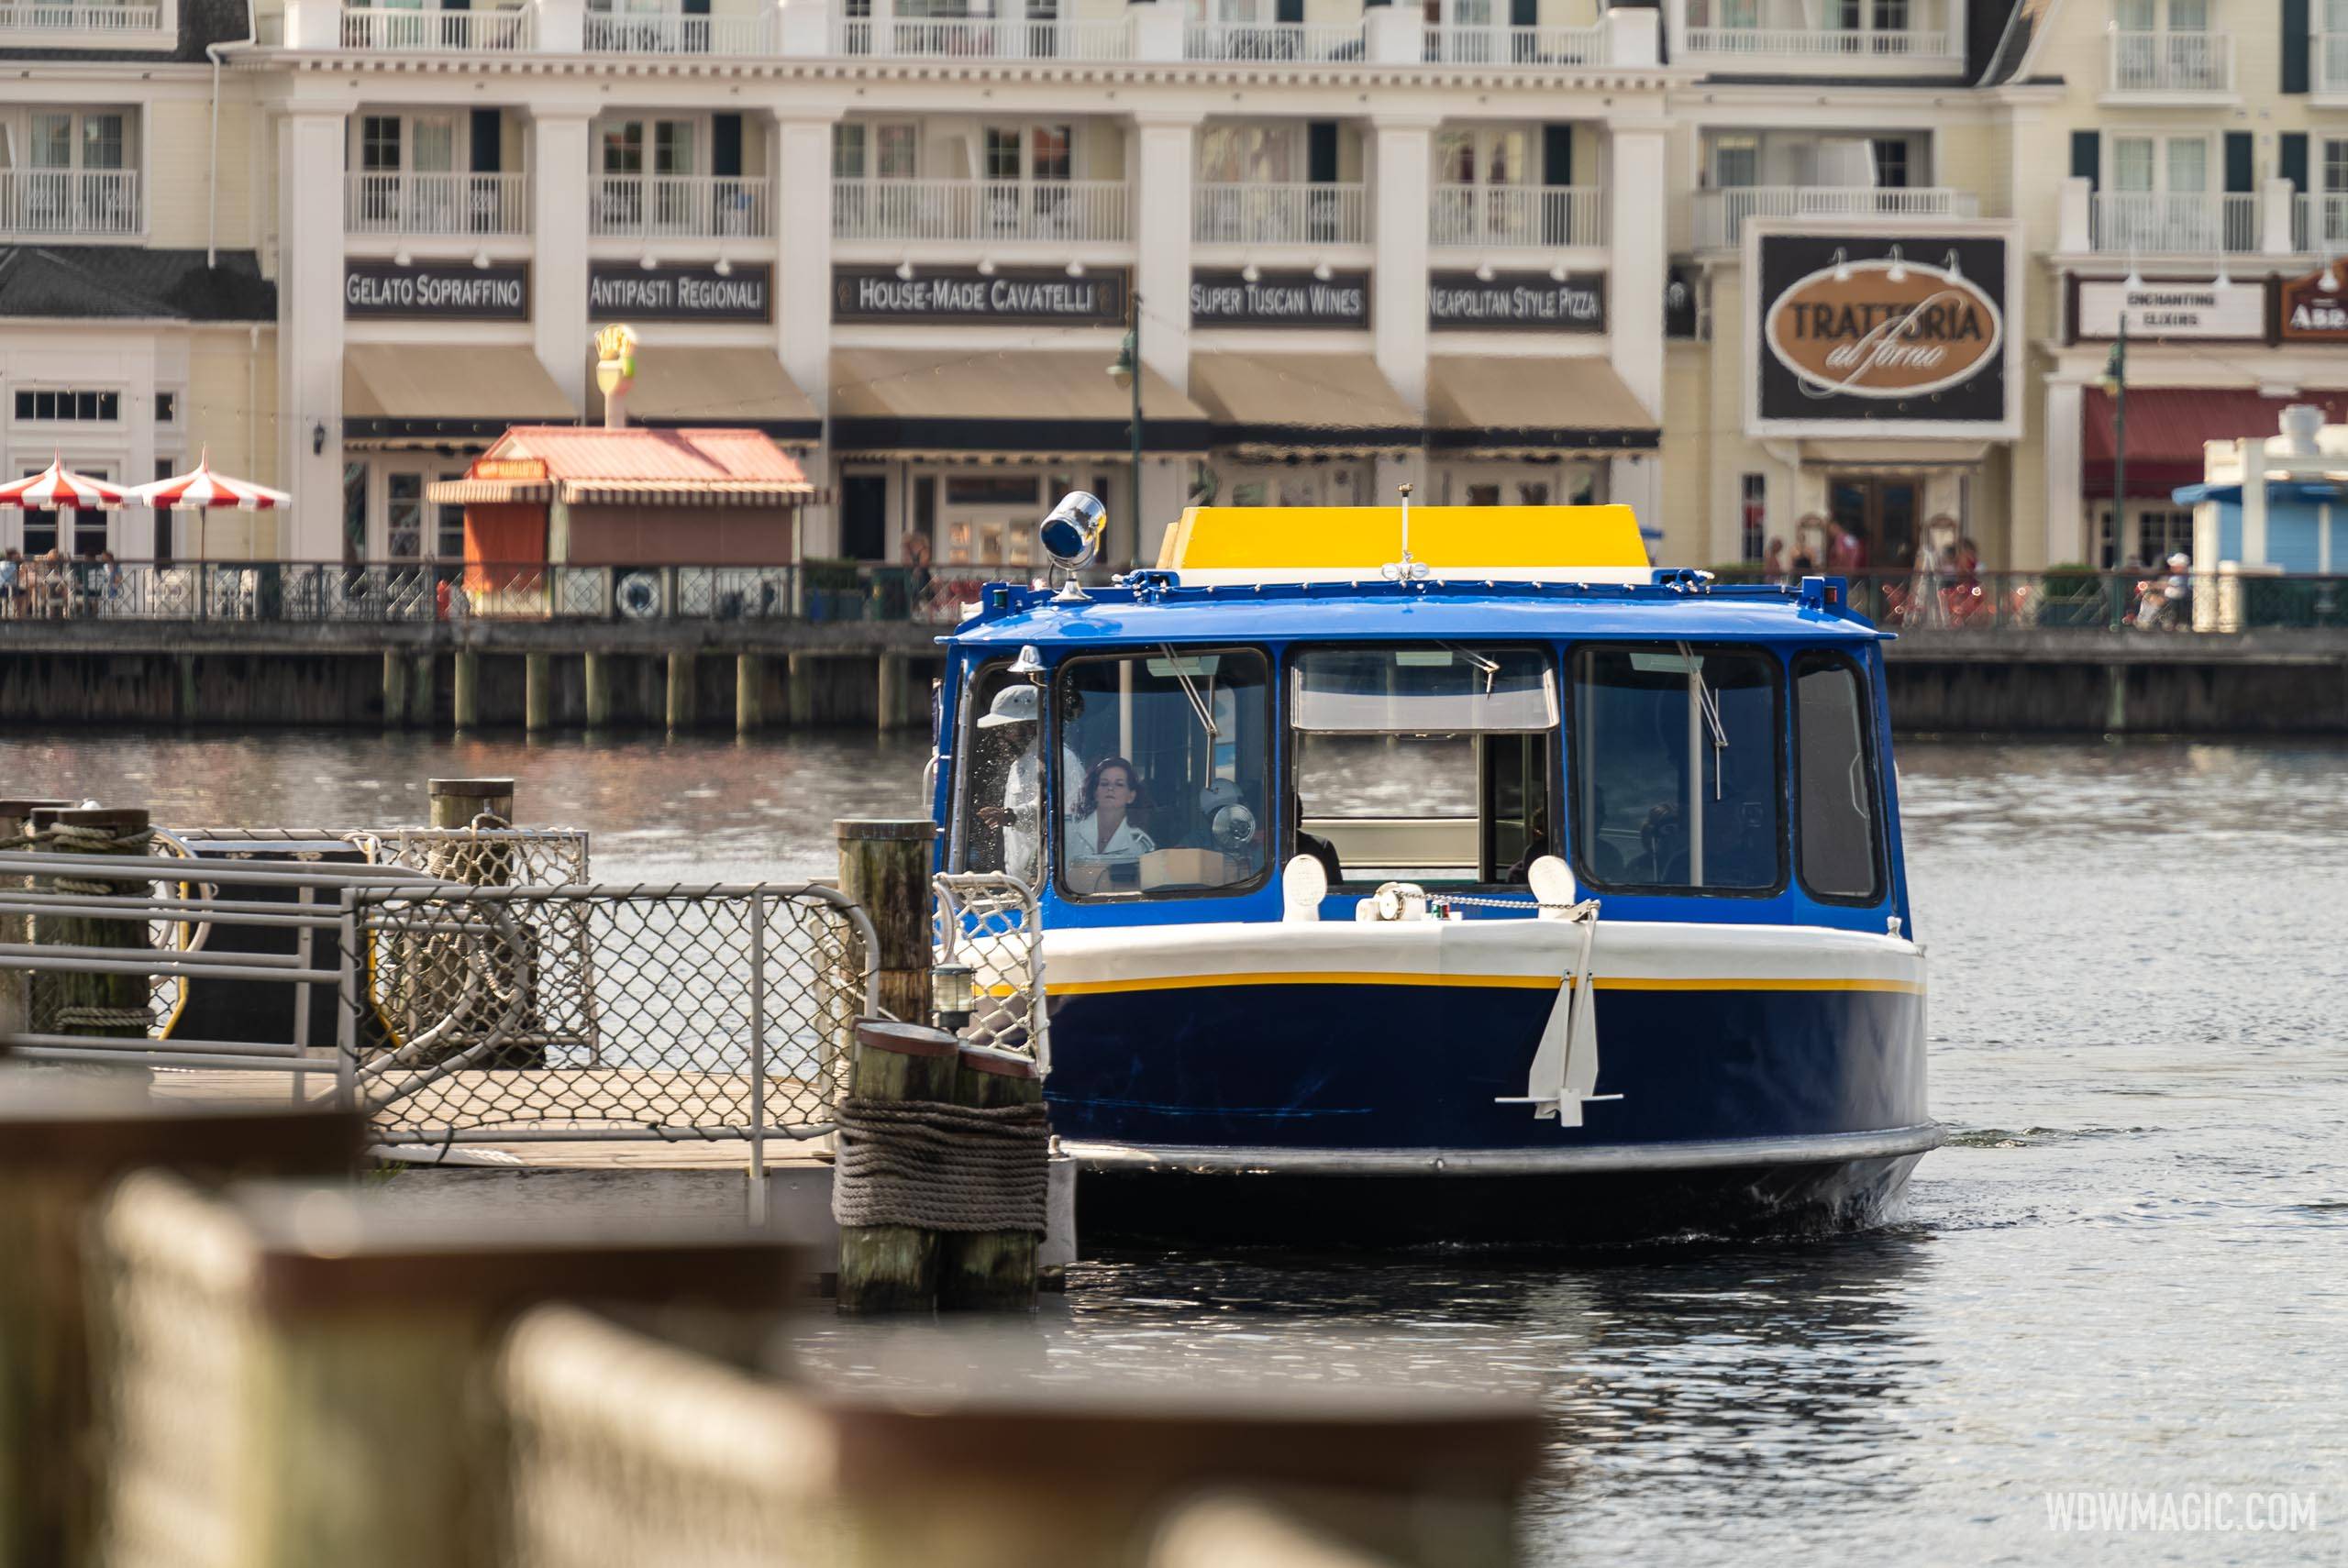 A closer look at the new color scheme for the Friendship Boats serving the EPCOT area resorts